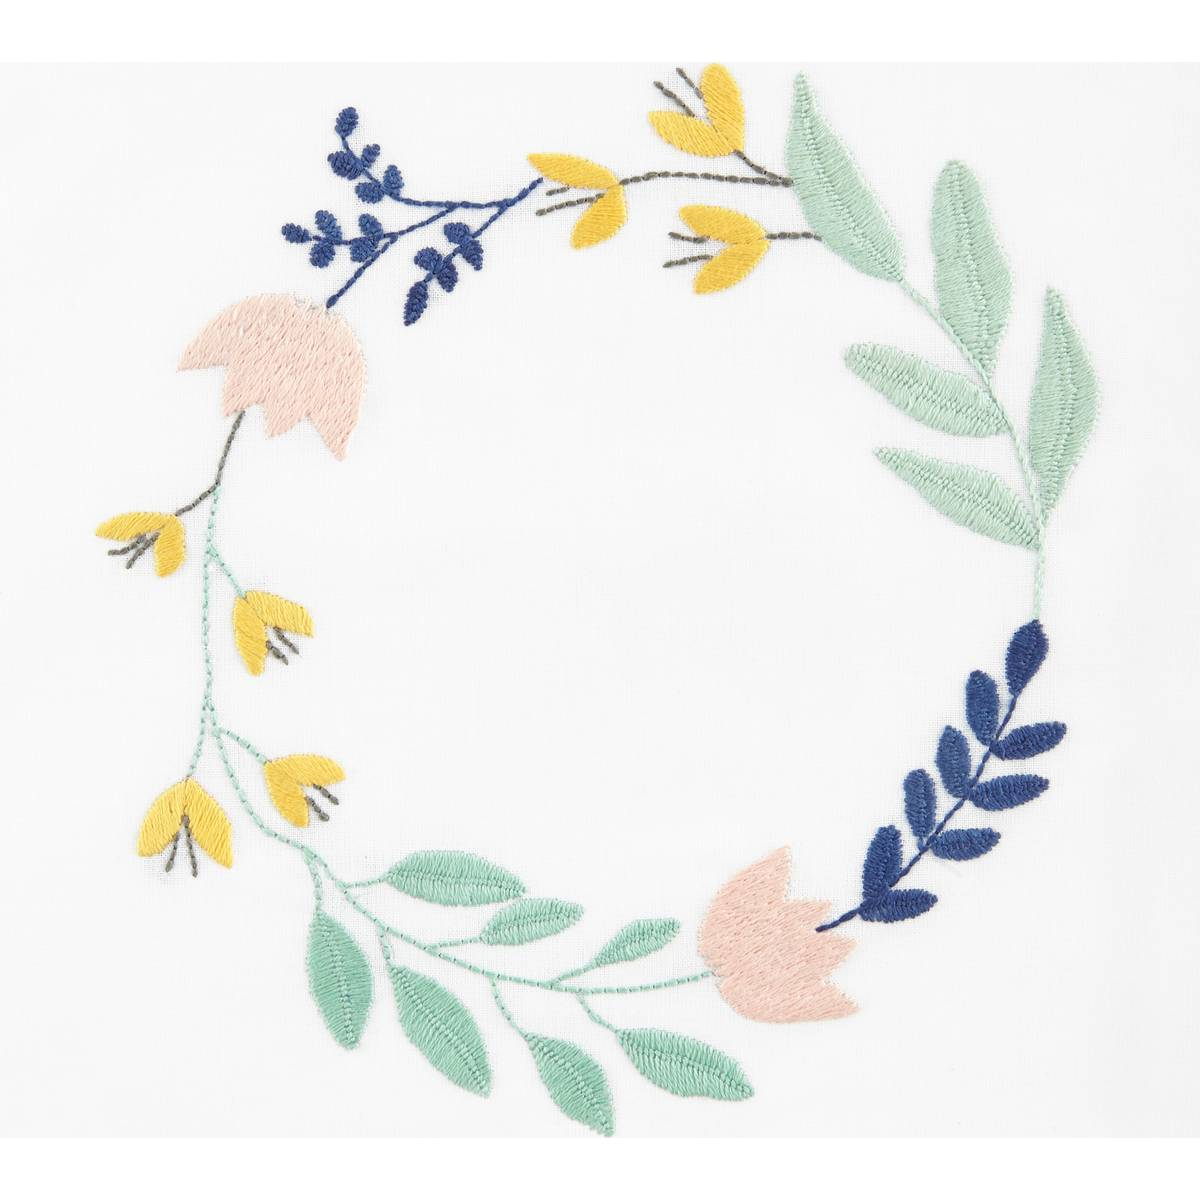 Embroidery Flower Pattern Free Pattern Dmc Floral Wreath Embroidery 0054 Hobcraft